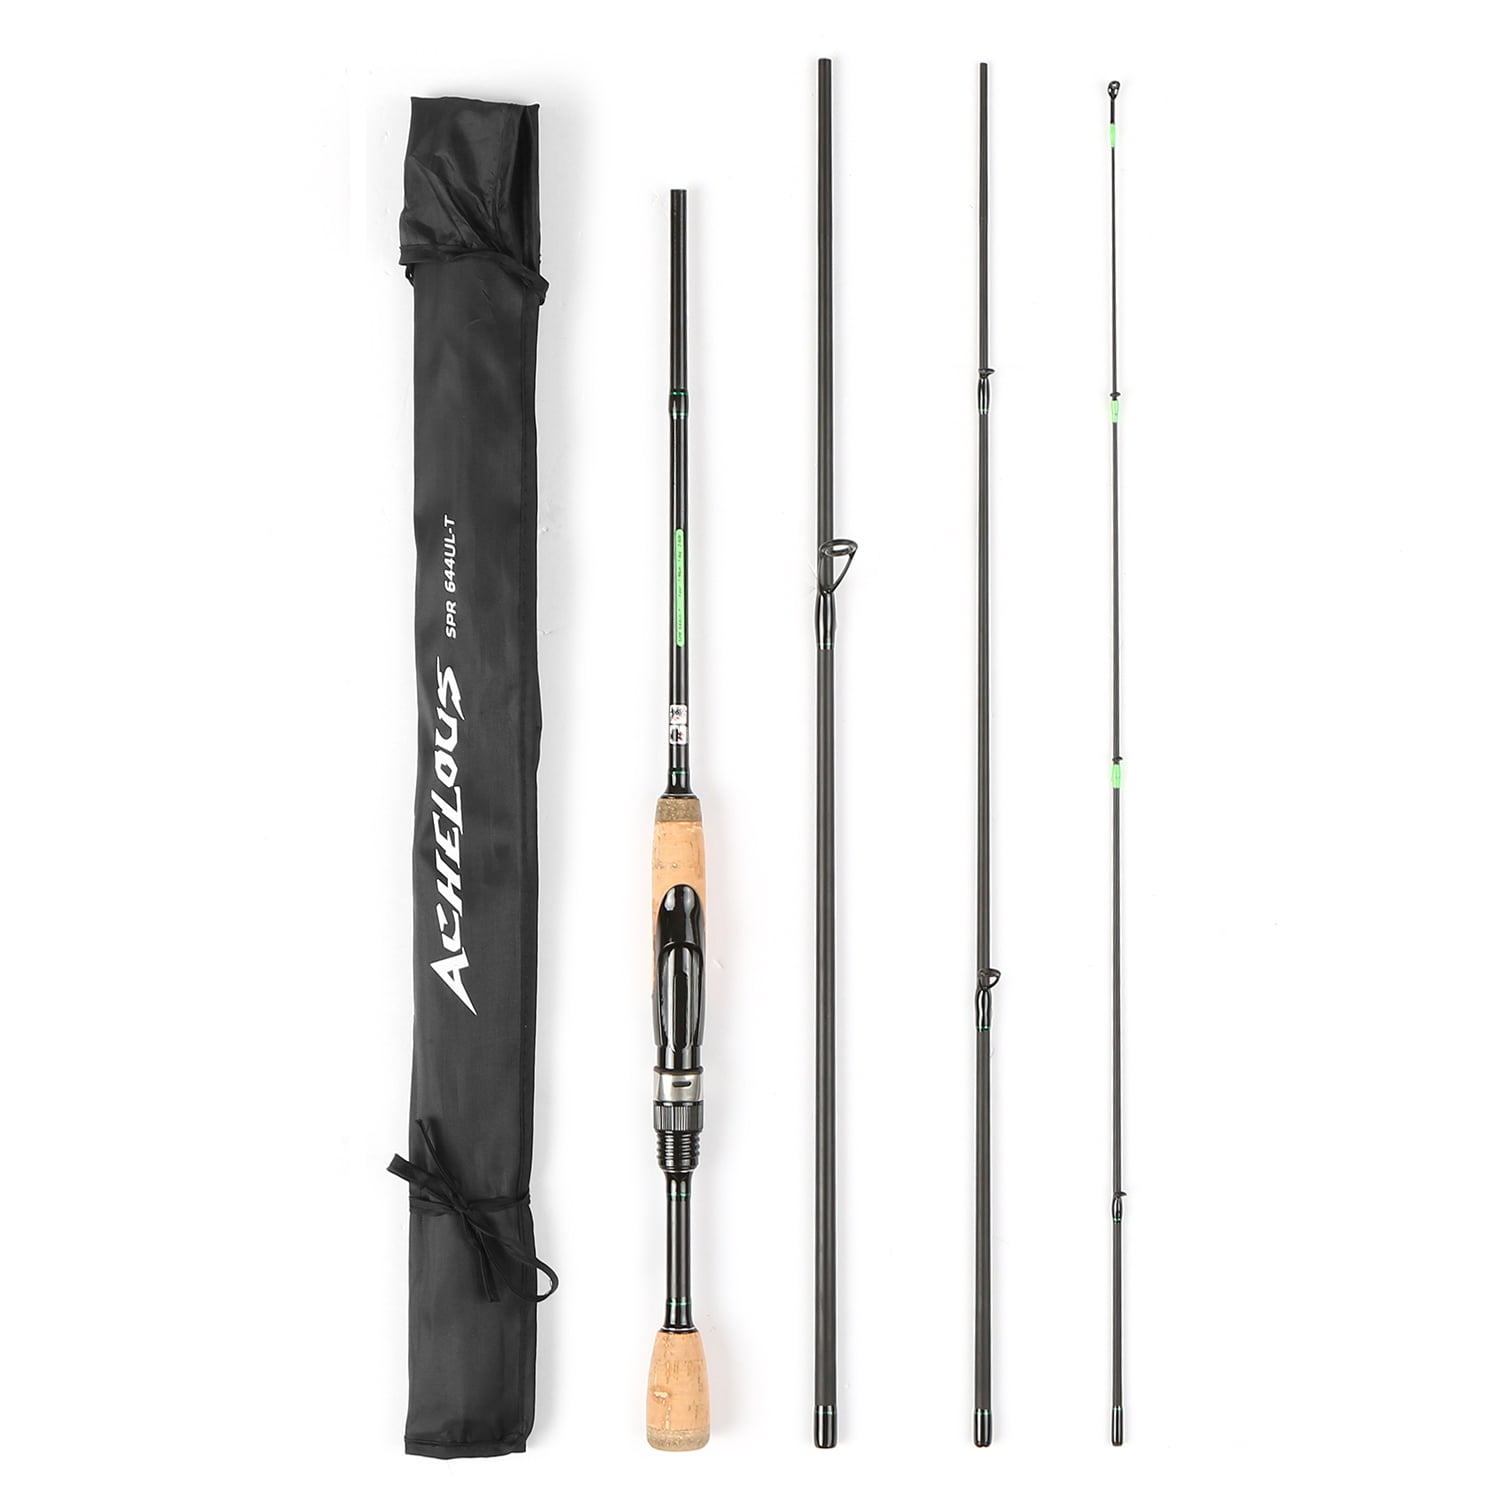 Portable Travel Spinning Fishing Rod 6.8FT Lightweight Carbon Fiber 4  Pieces Fishing Pole